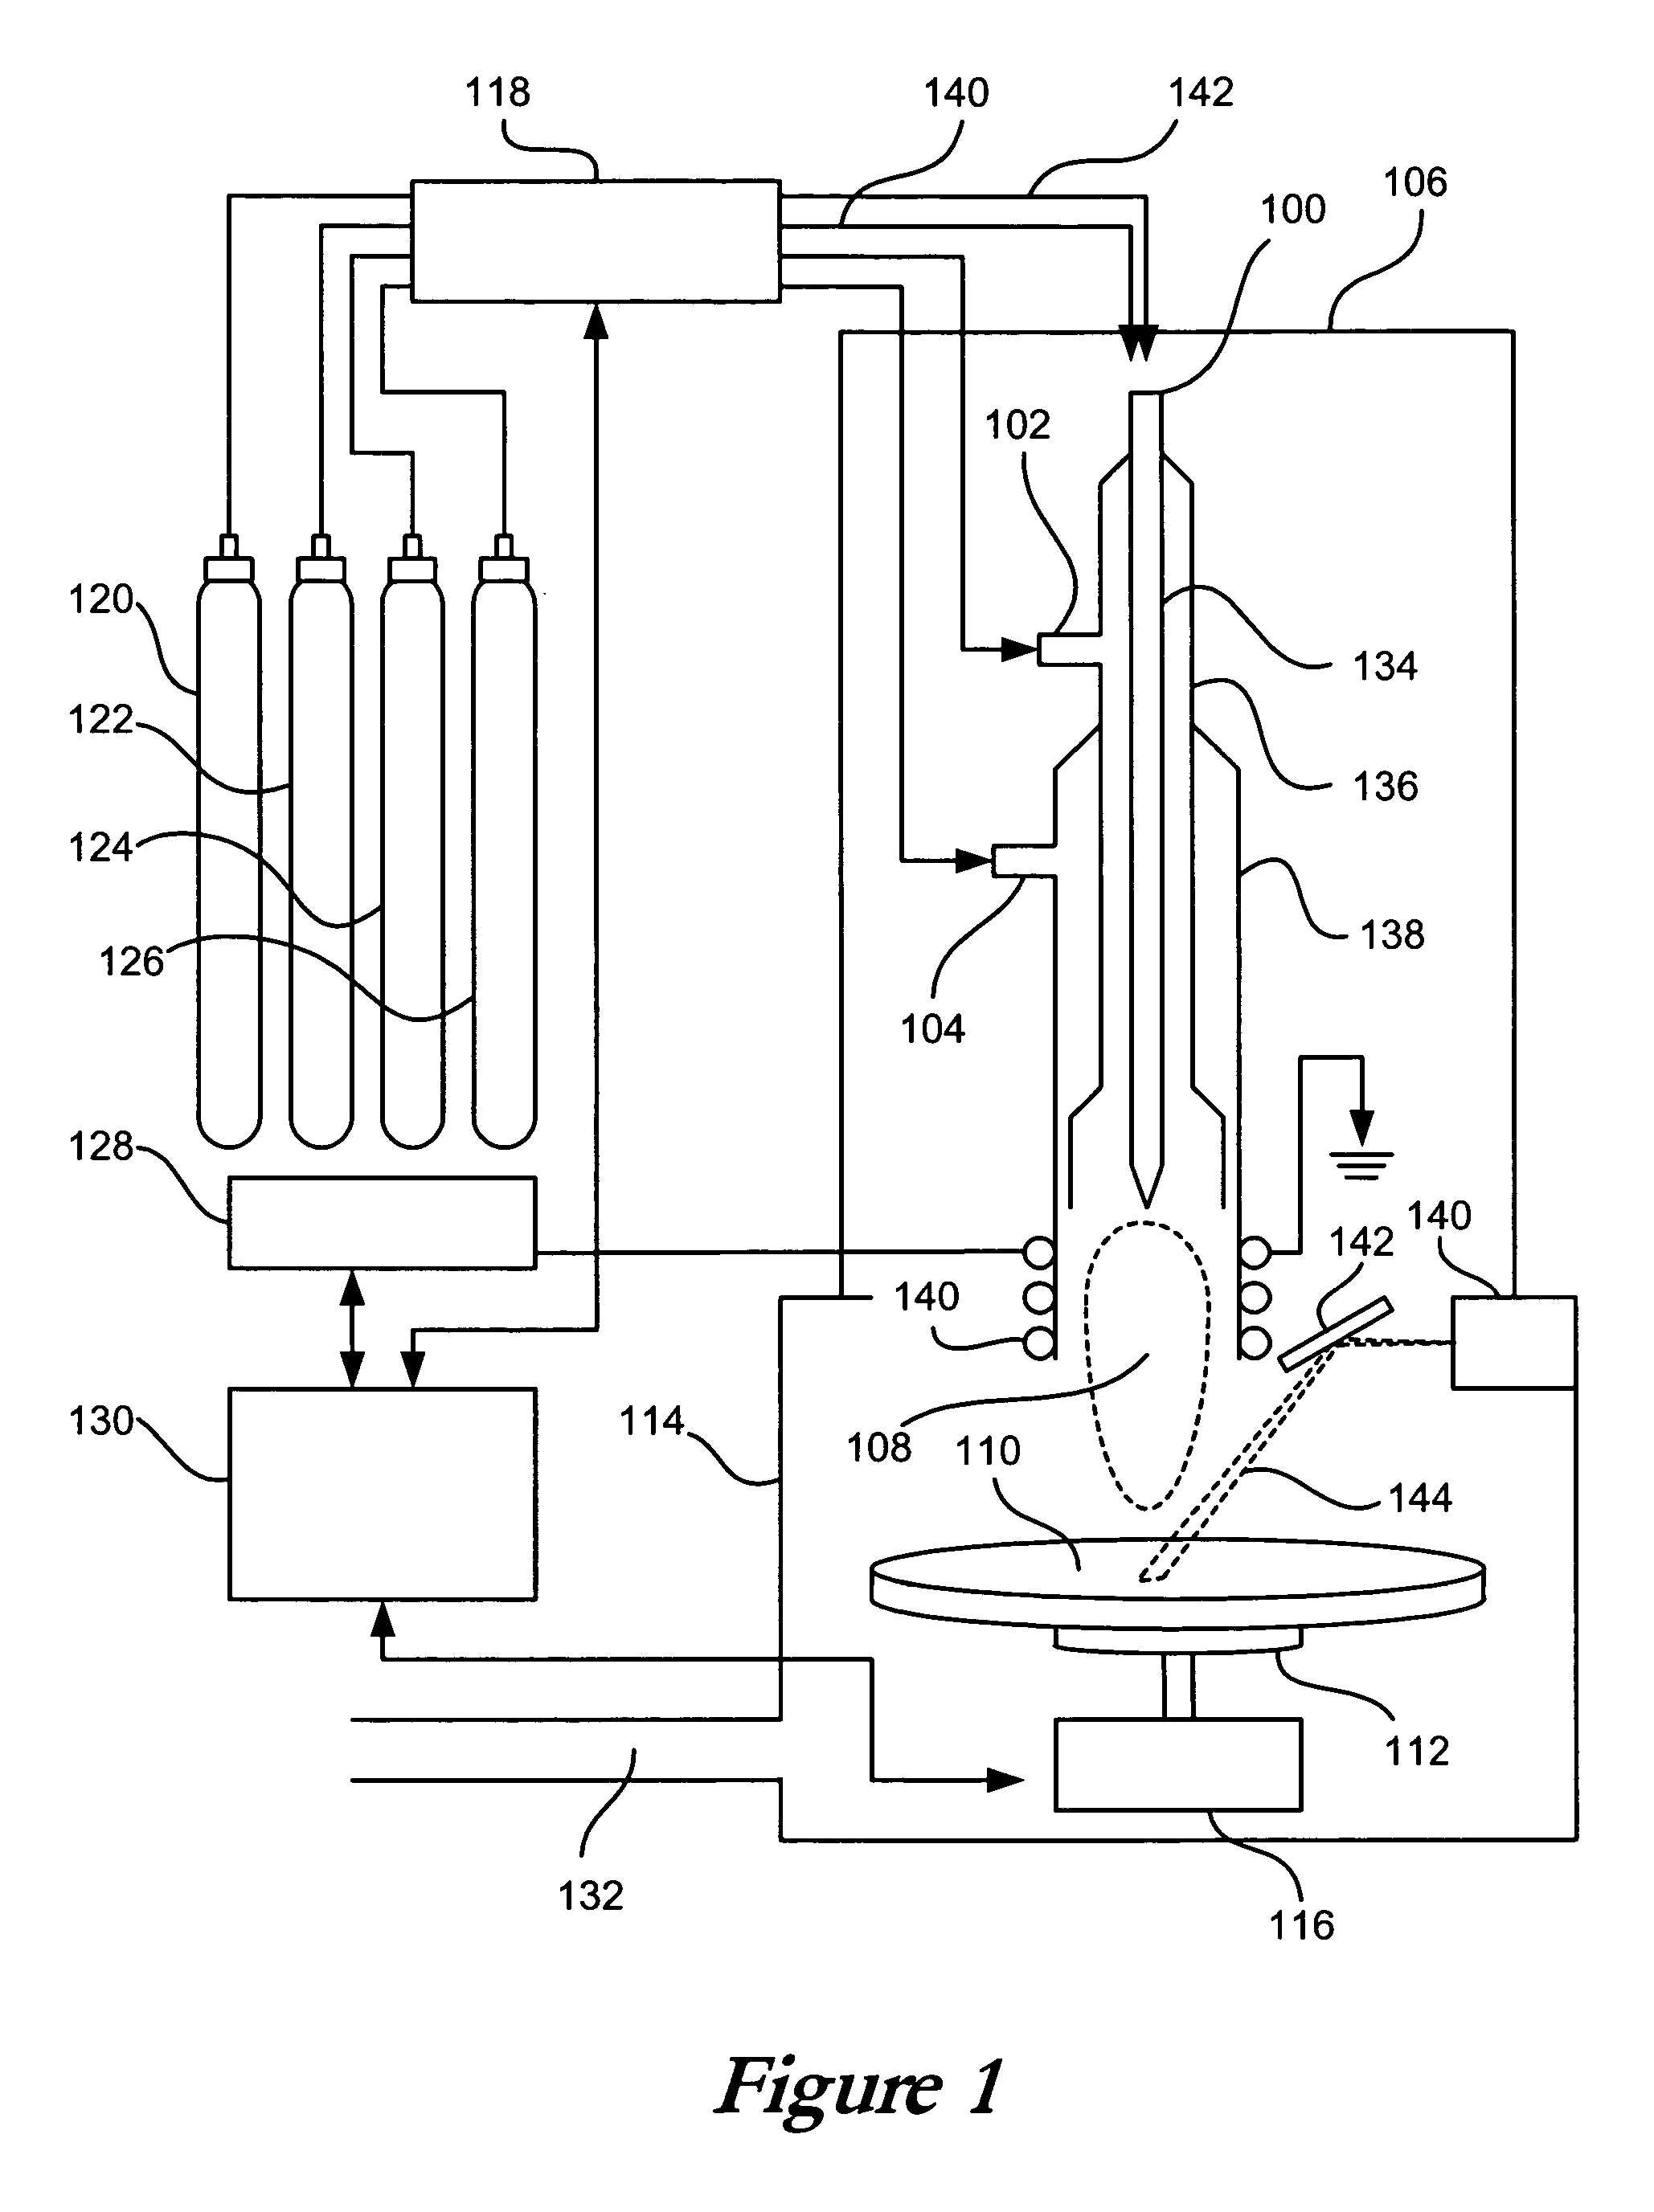 Systems and methods for laser-assisted plasma processing